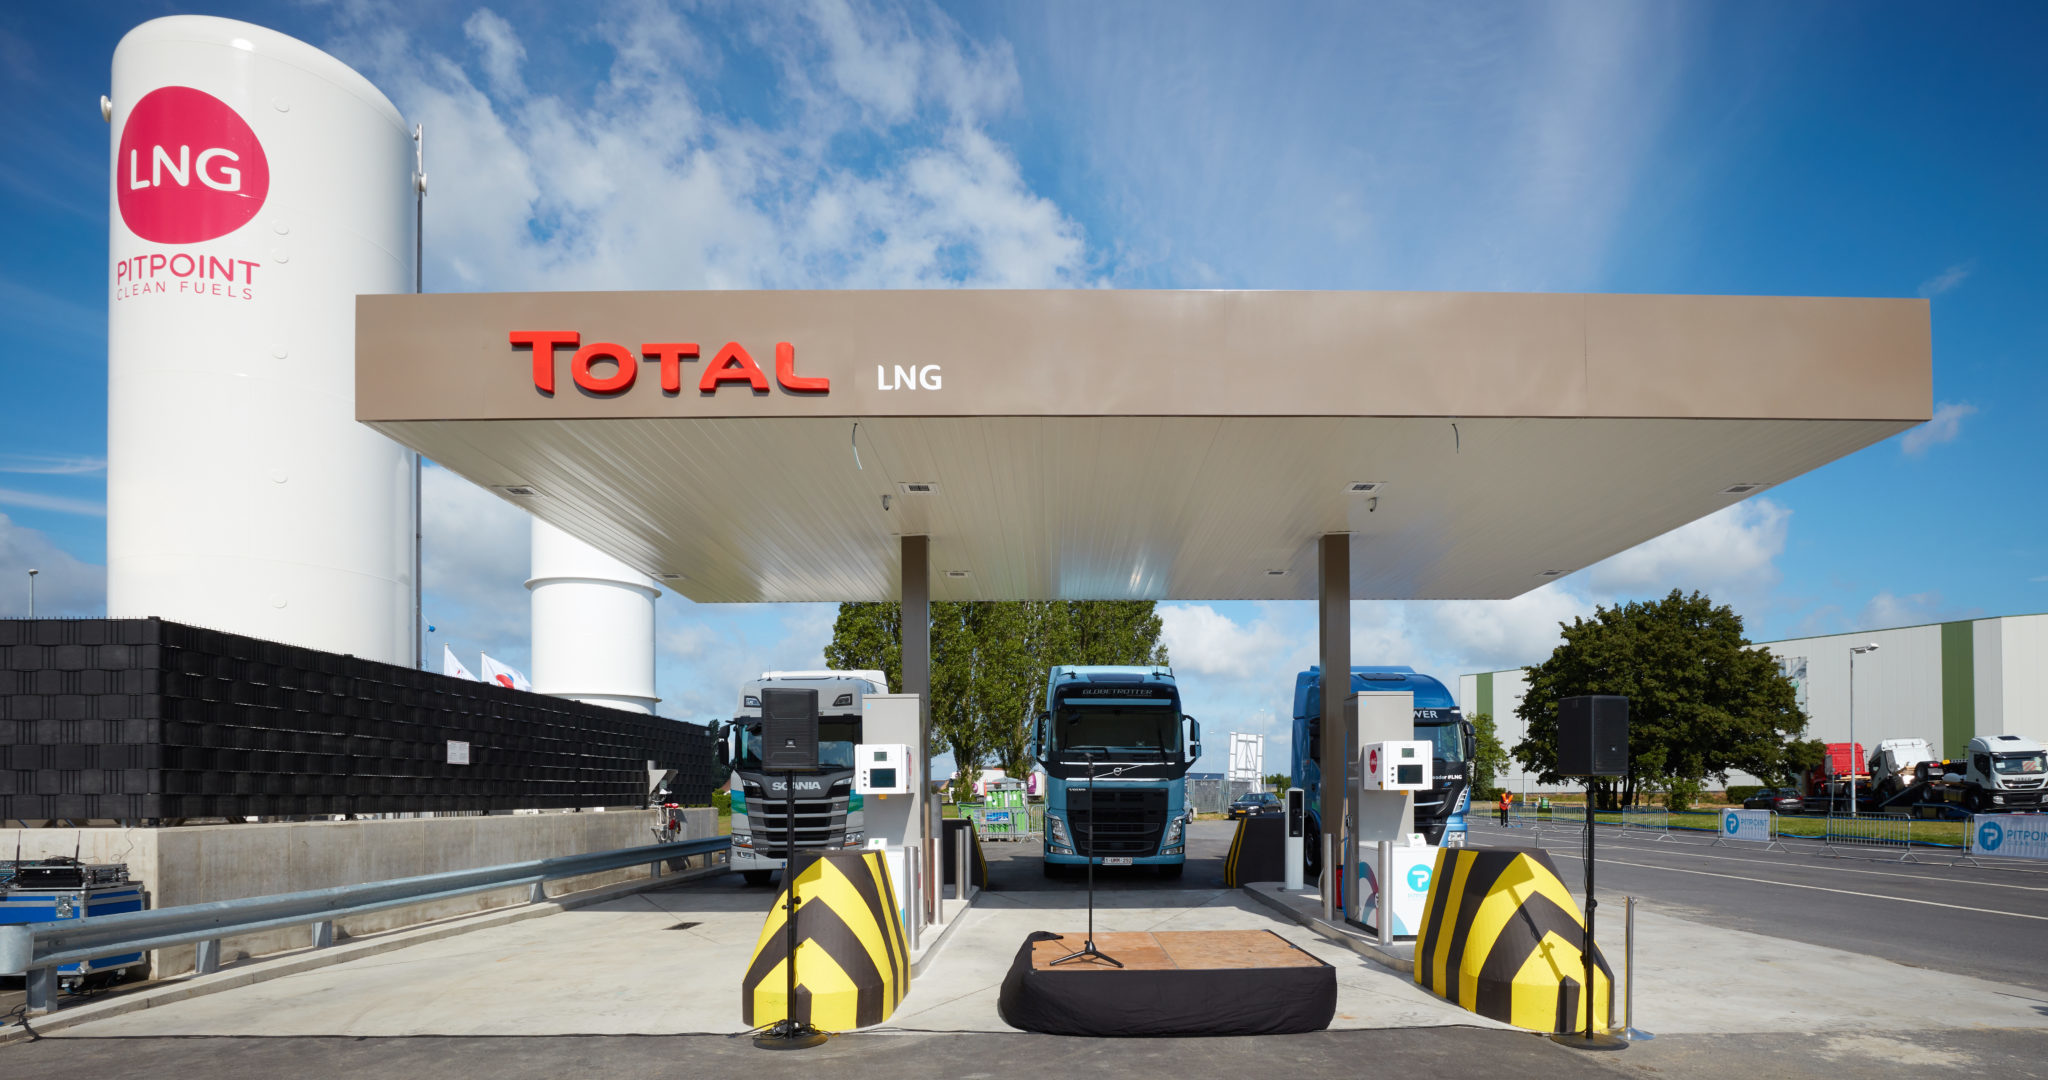 PitPoint opens its first LNG station in Belgium